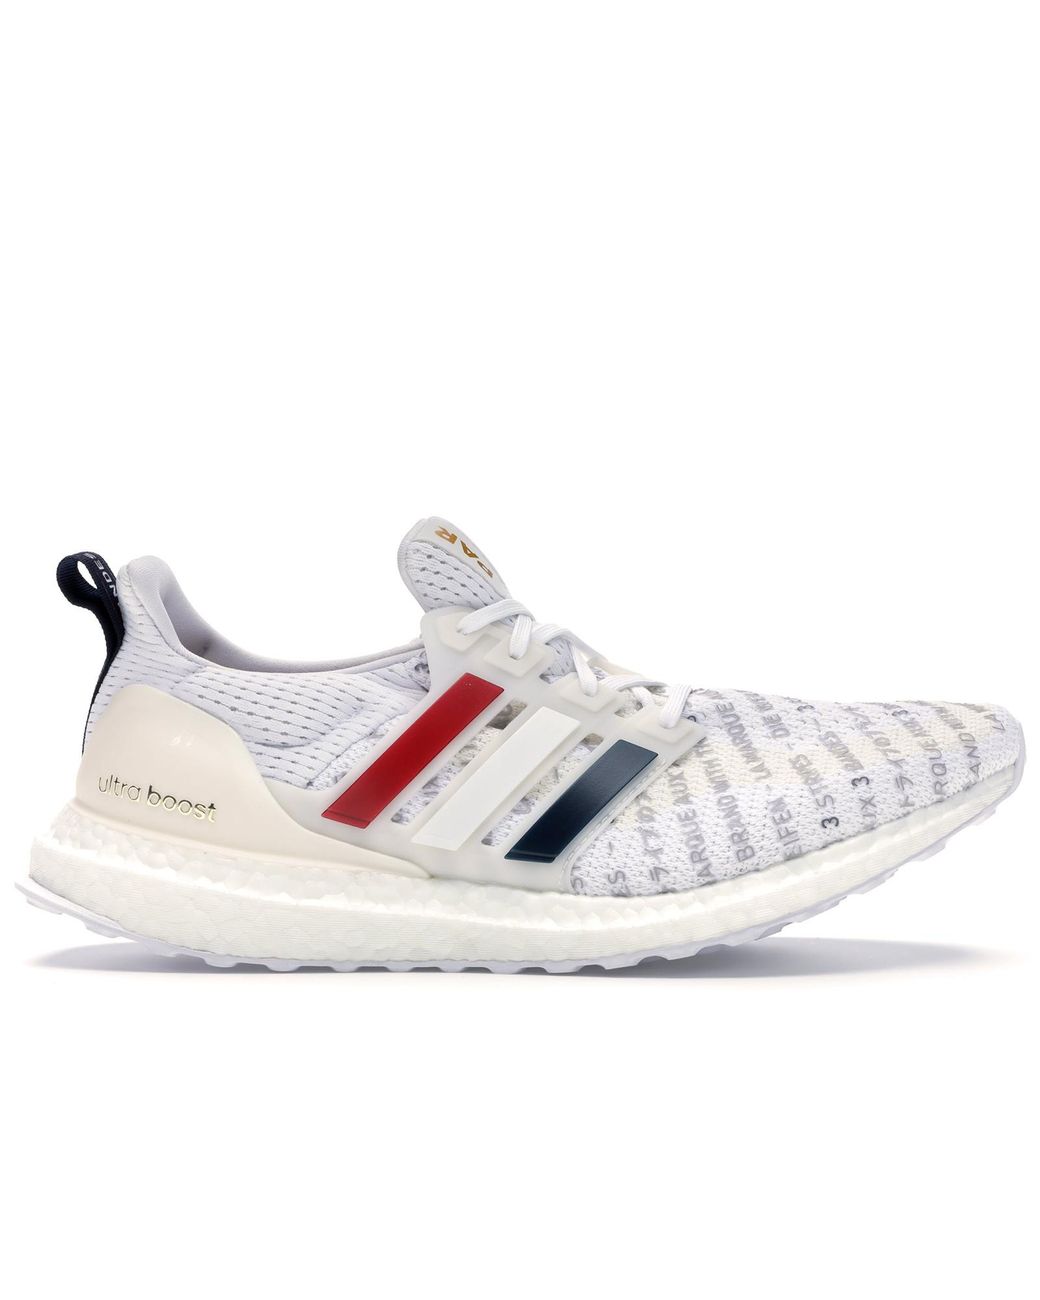 adidas Ultra Boost 2.0 City Series Paris in White for Men - Lyst